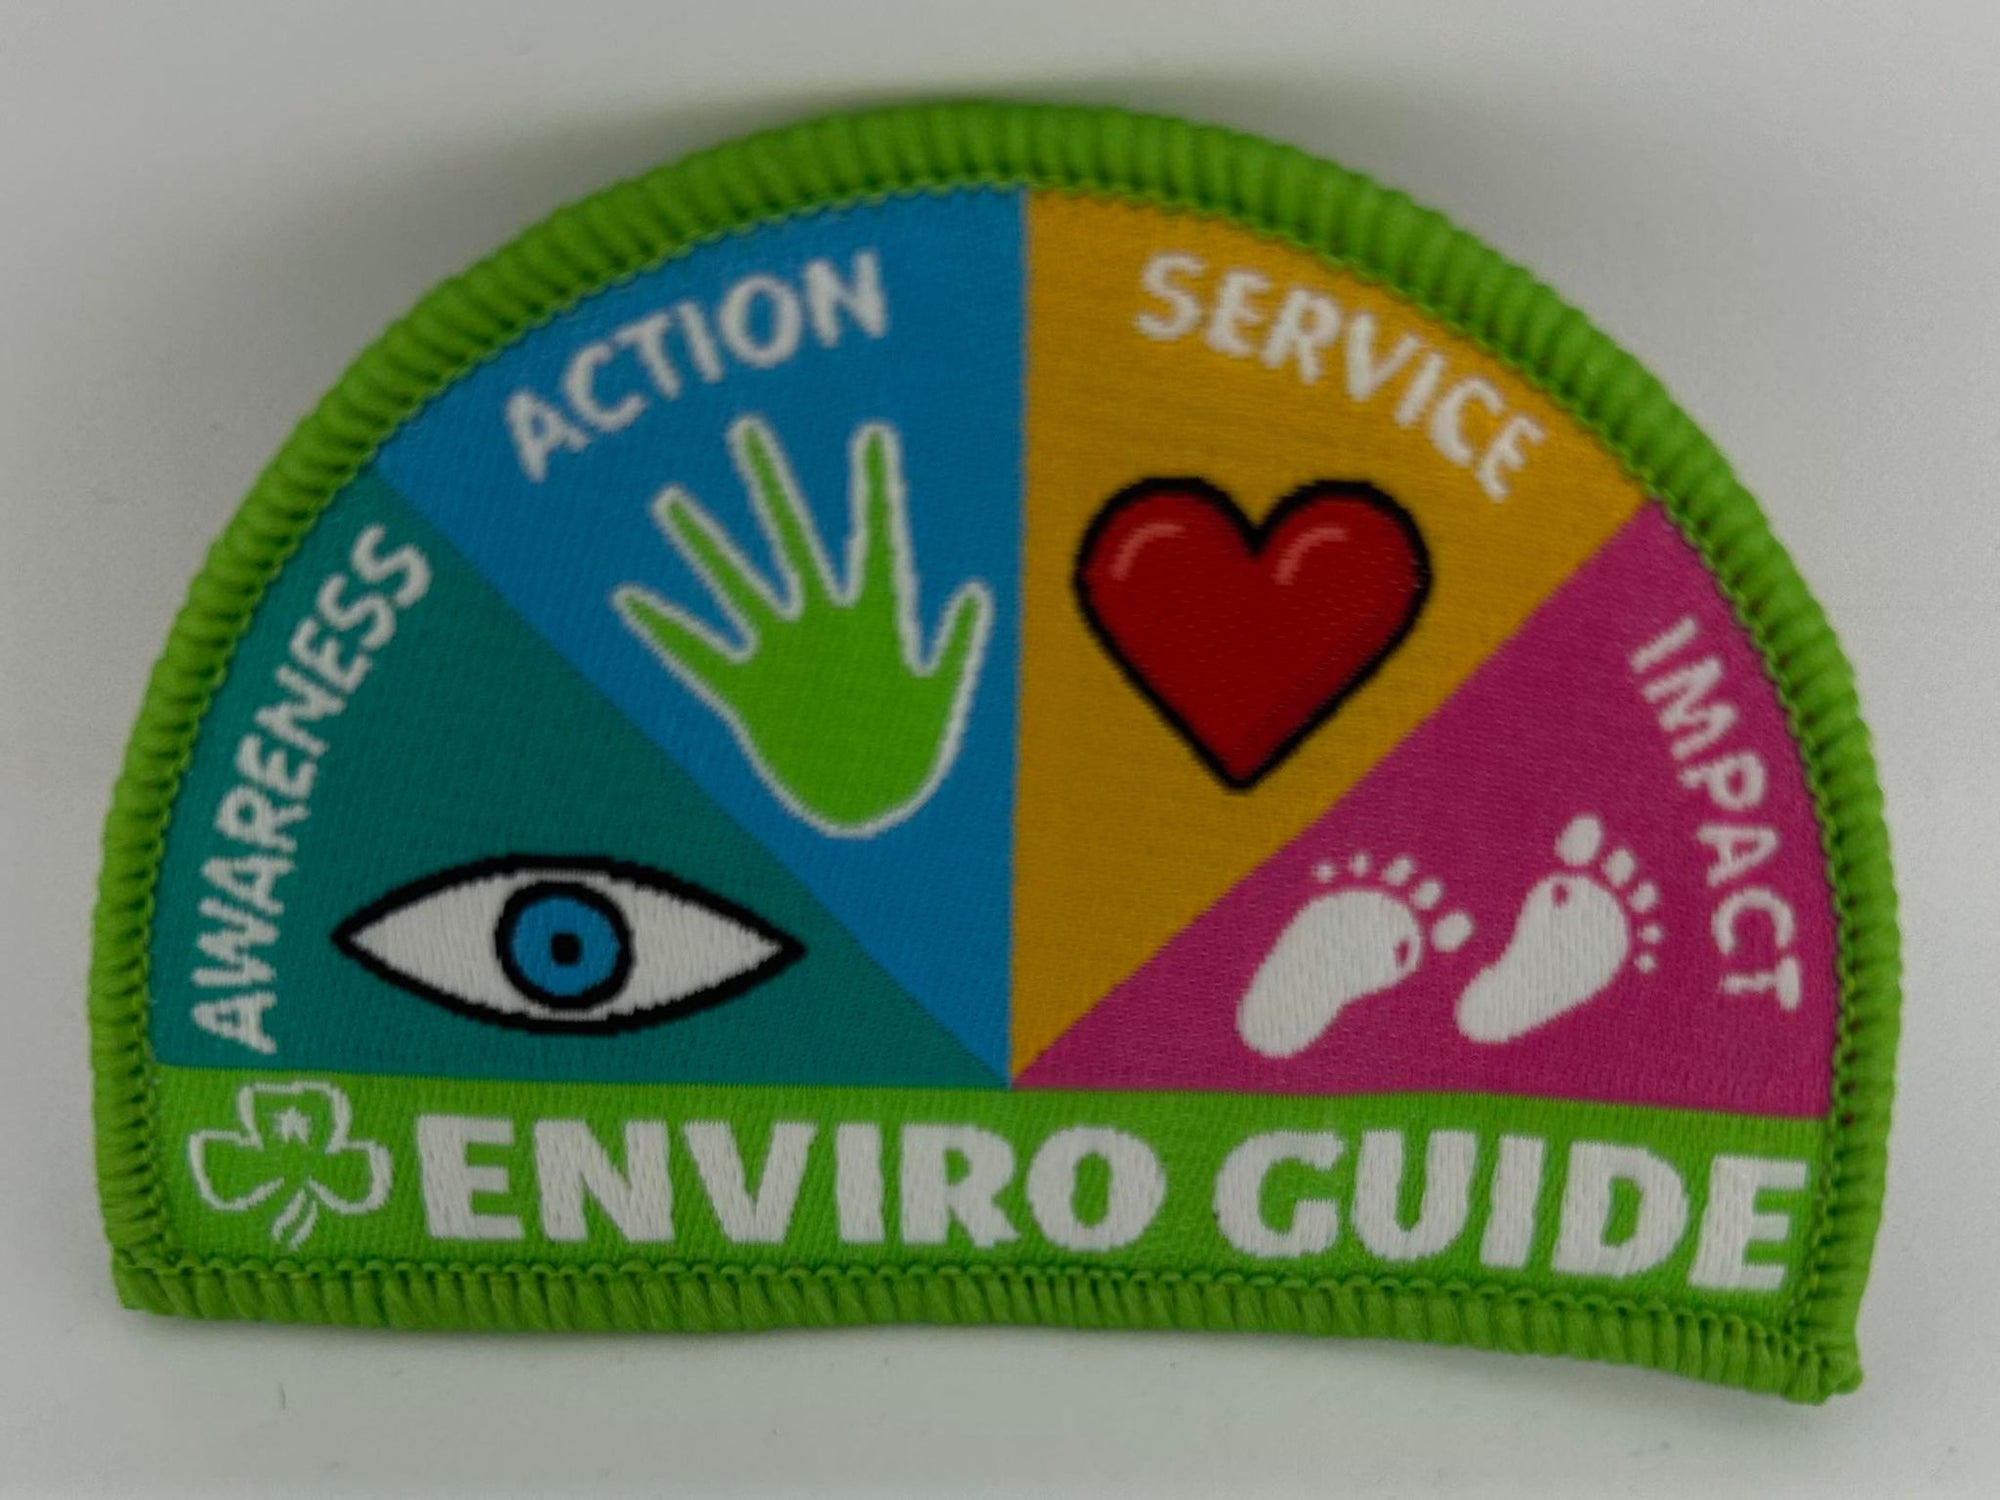 a semi circled badge bound in green with enviro guide written on it